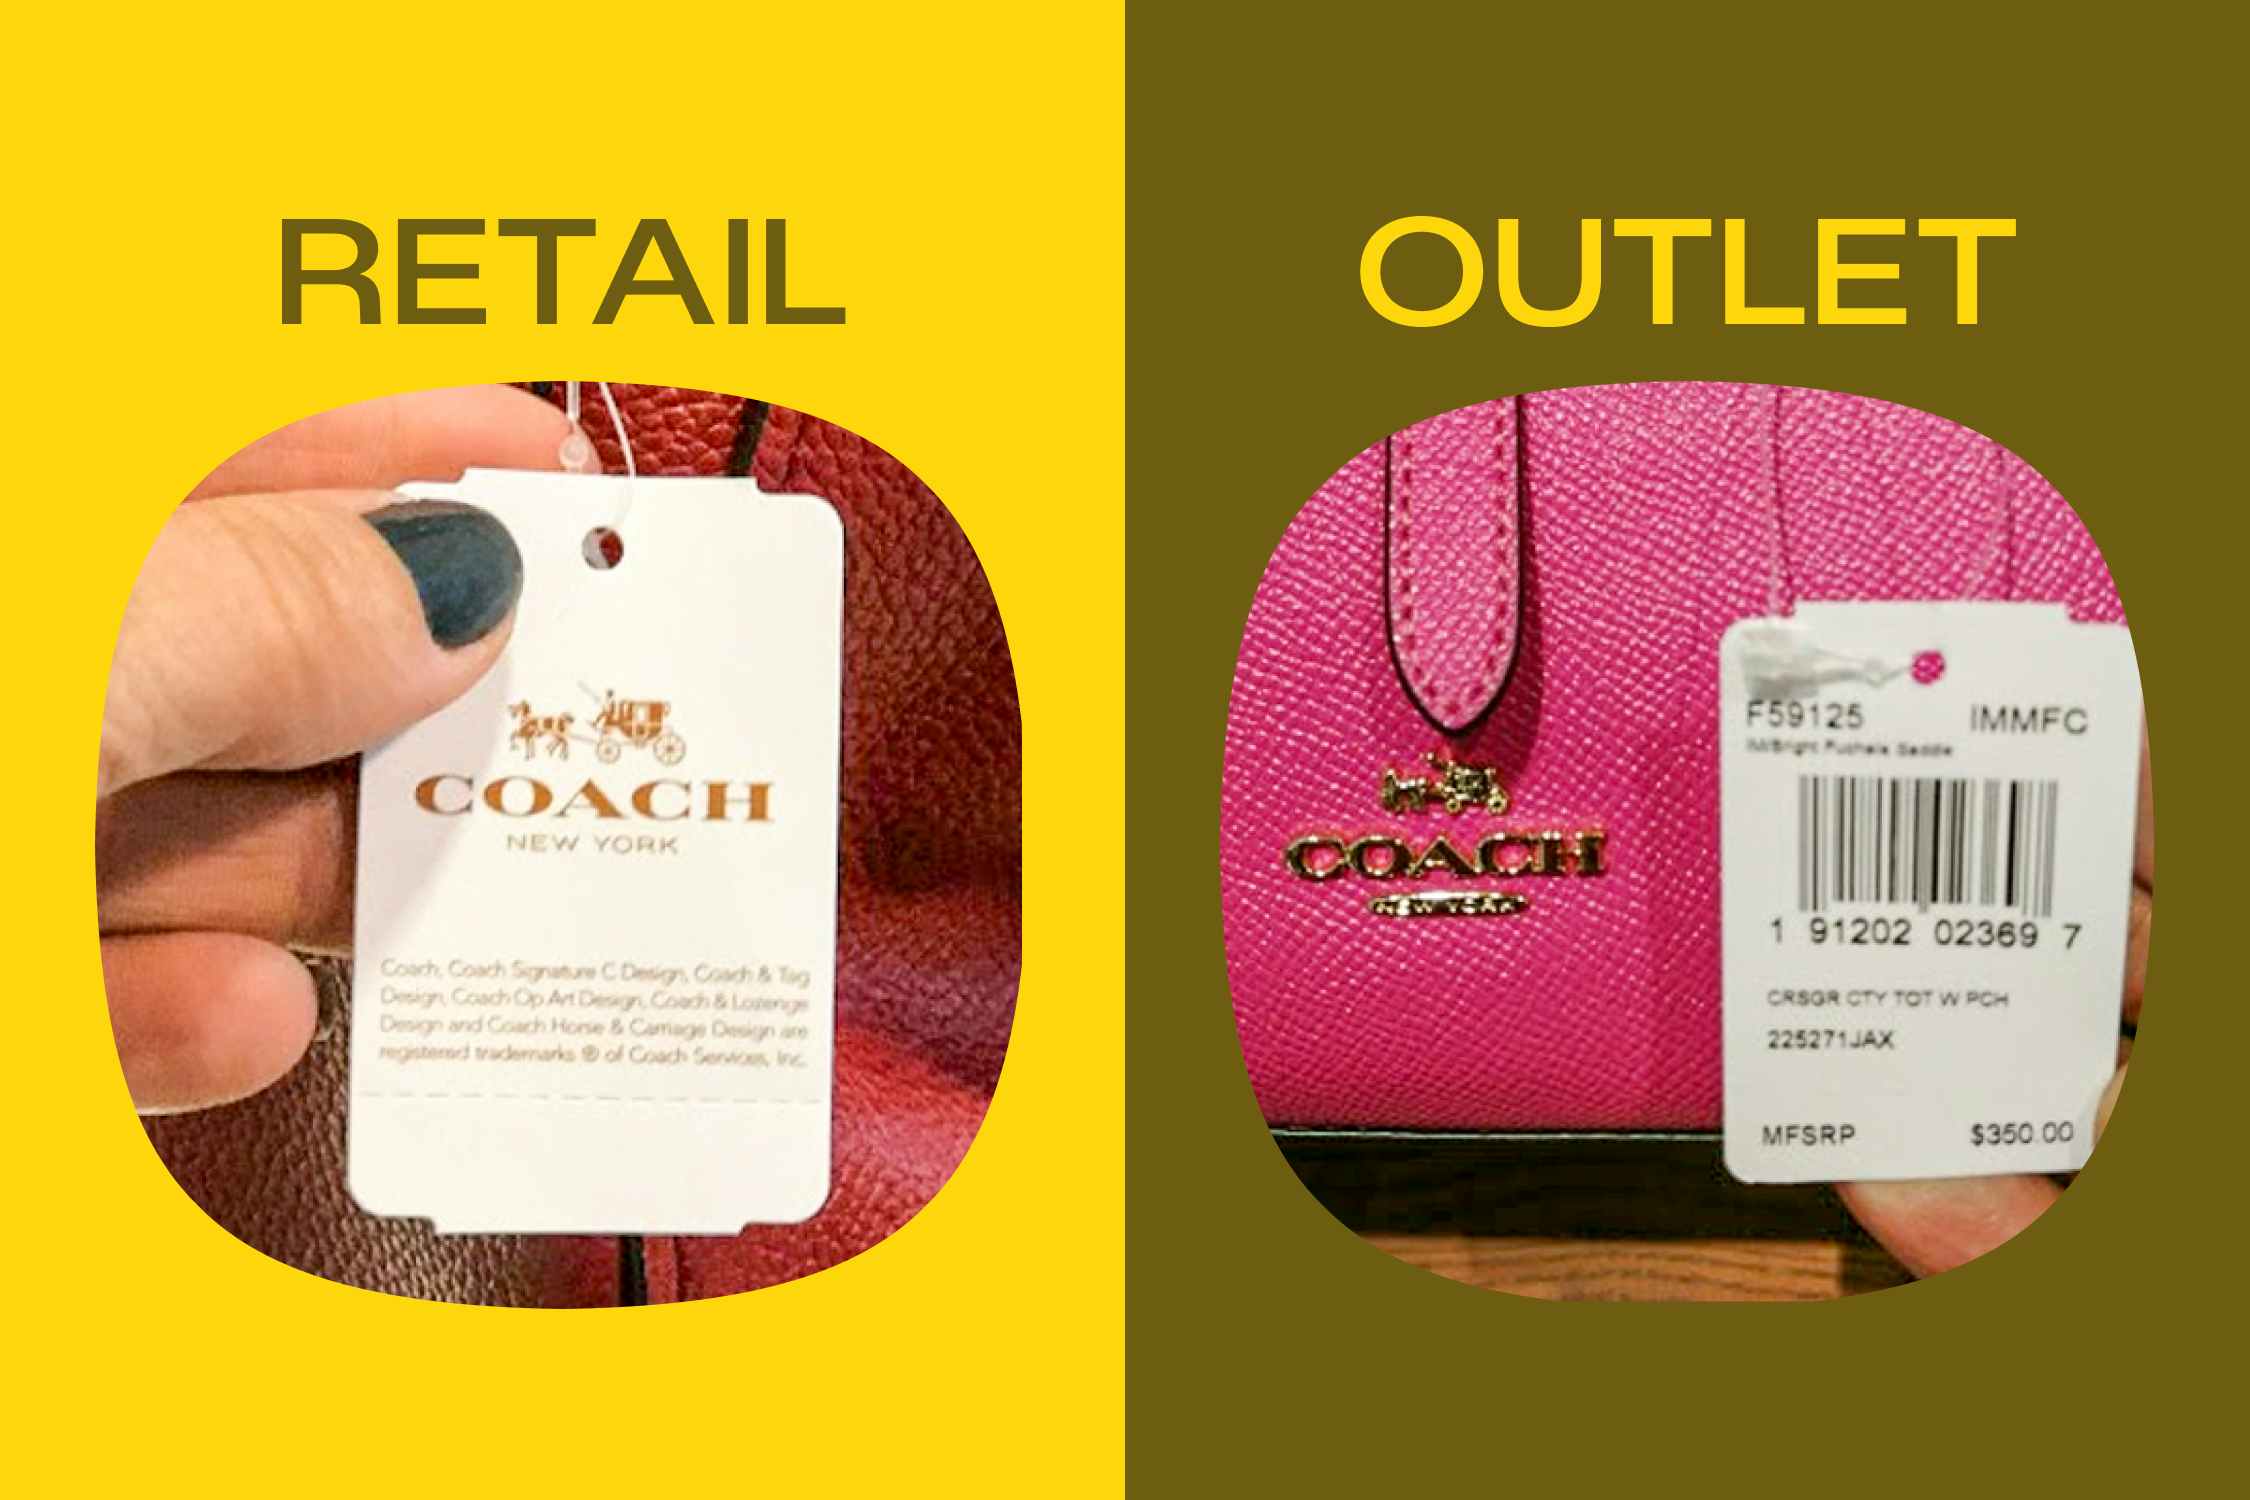 an example of a retail and outlet version of Coach items